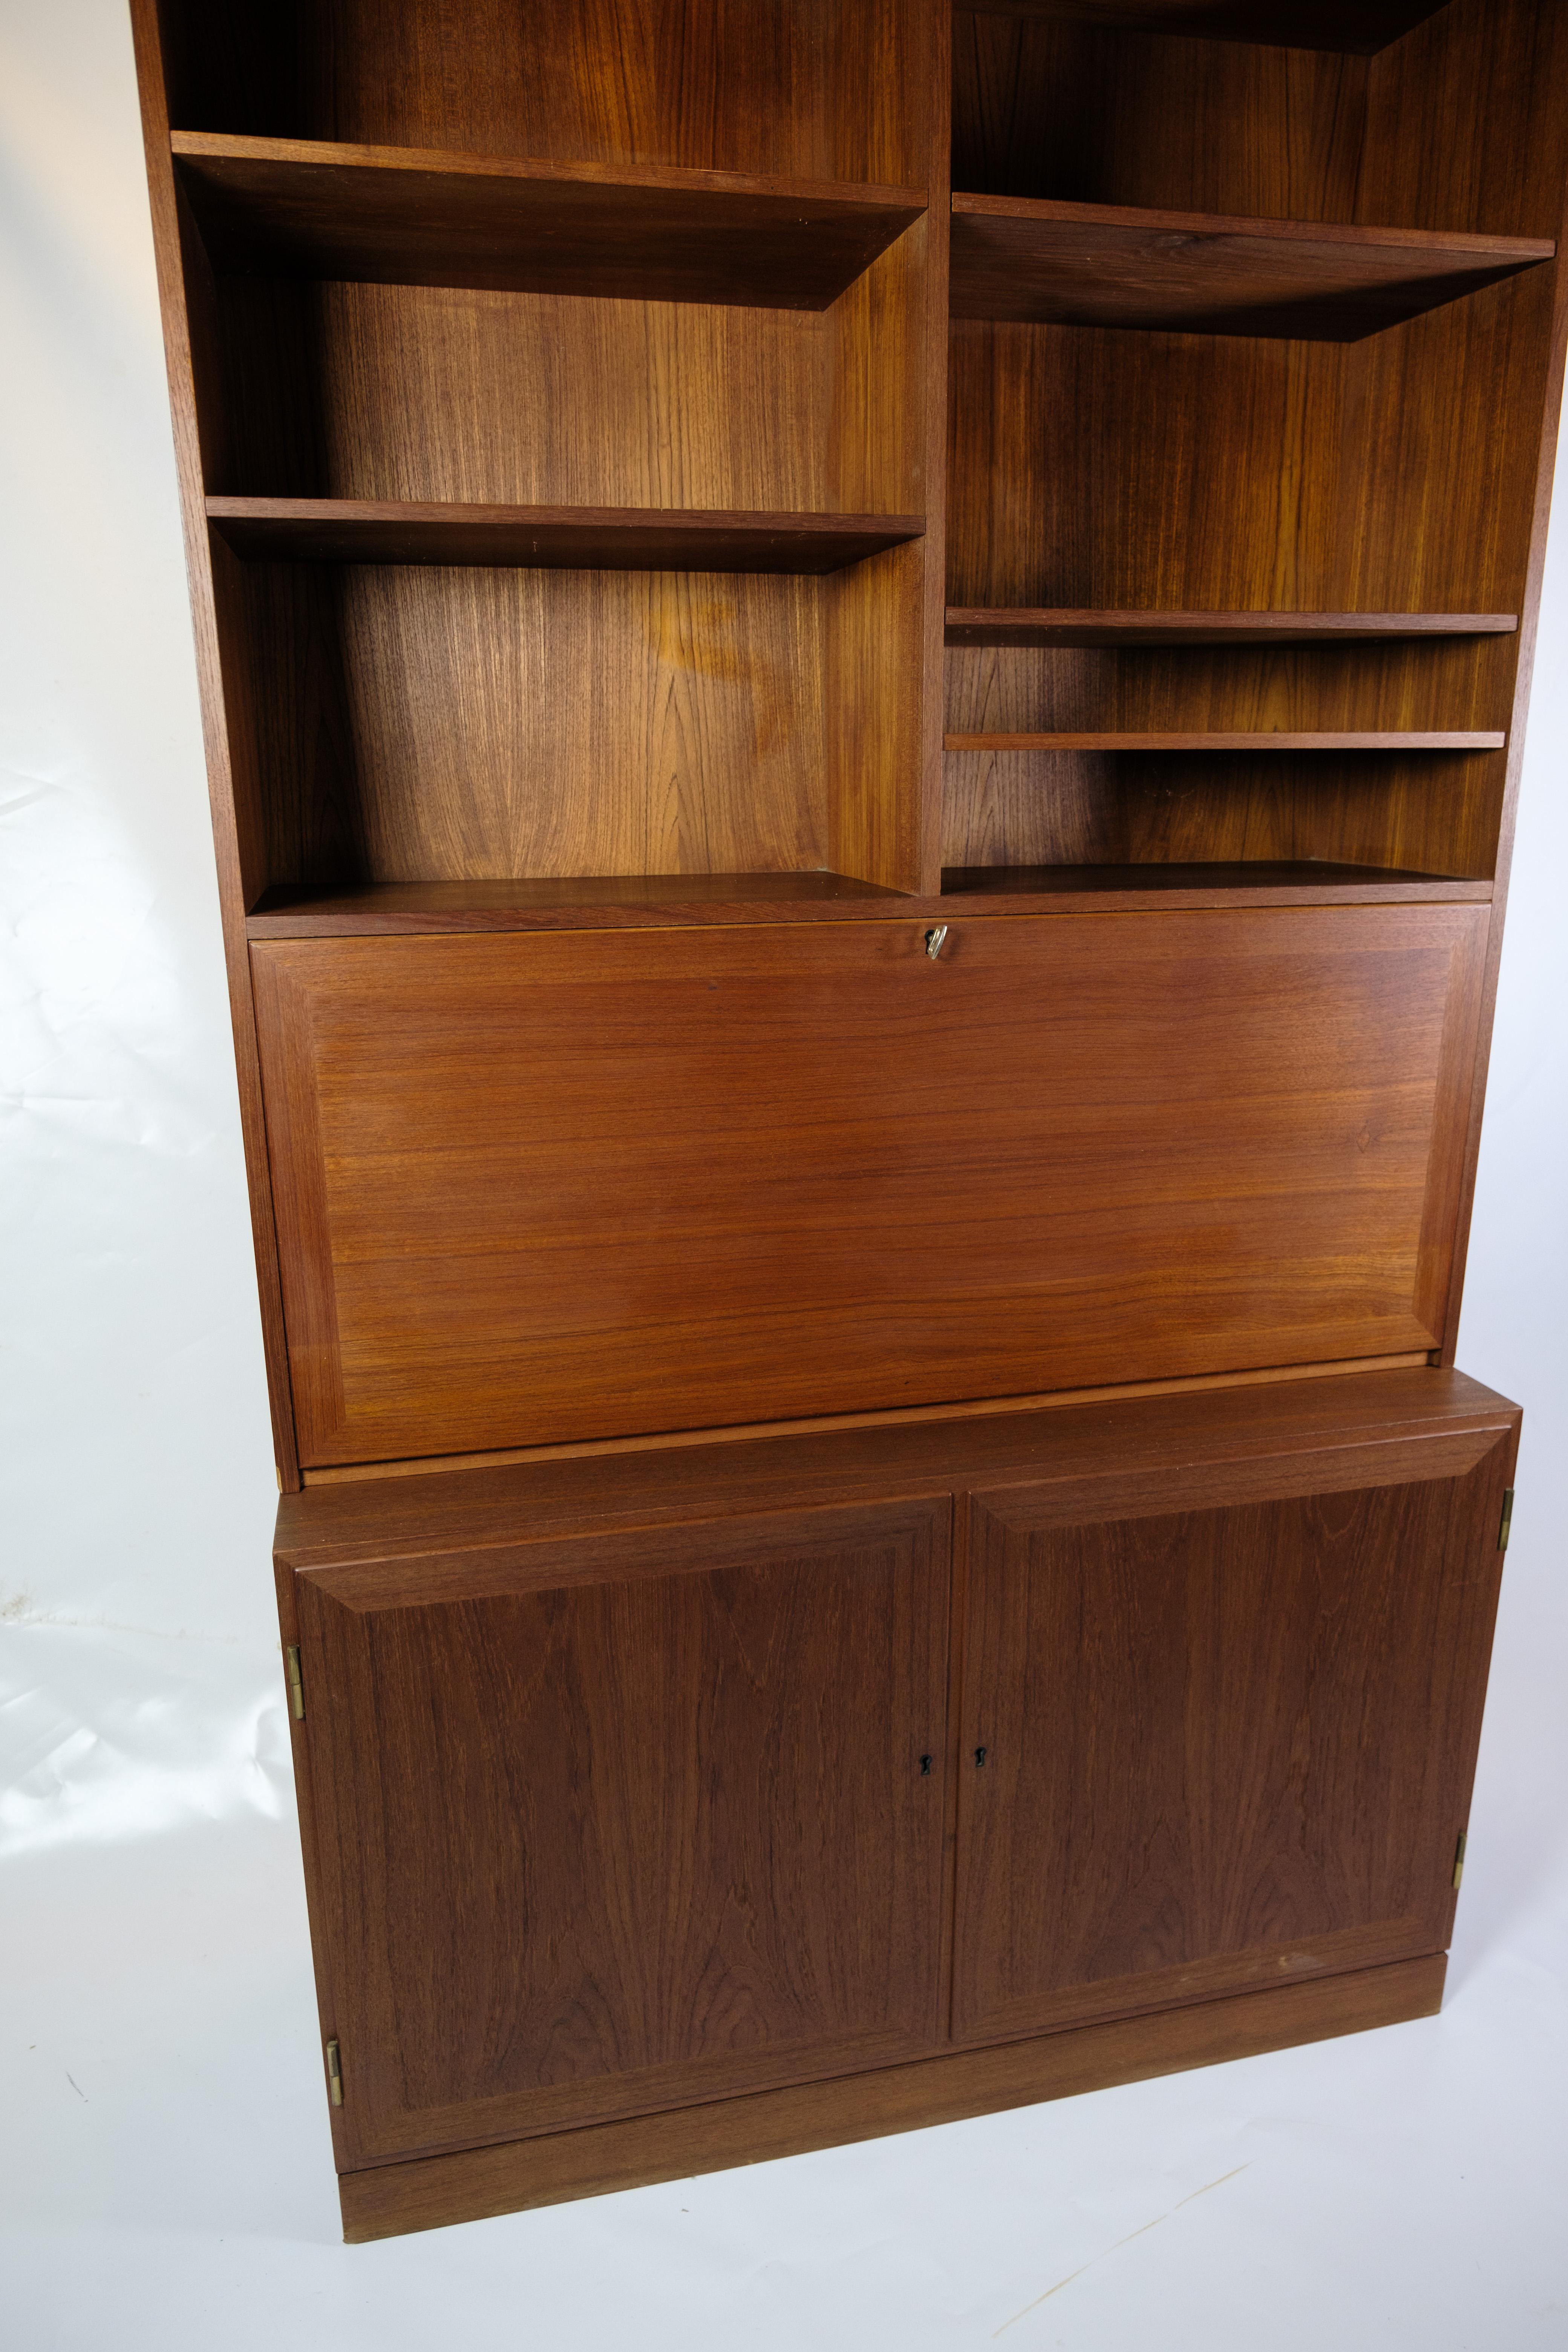 Mid-Century Modern Bookcase With Secretary/Desk Made In Teak, Danish Design From 1960s For Sale